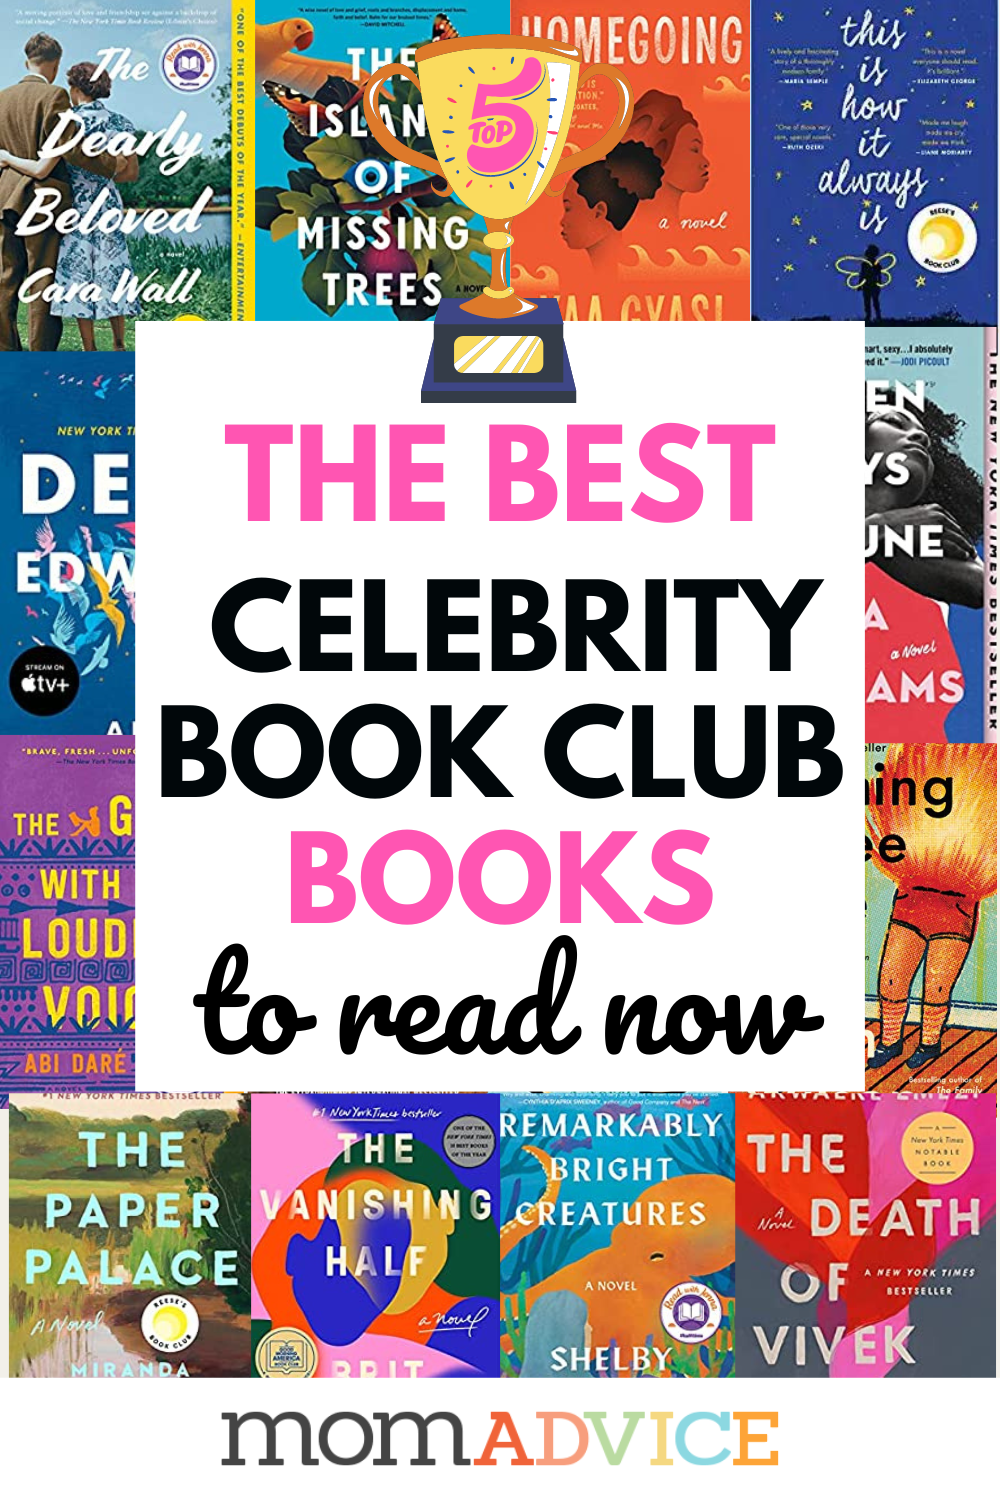 My Top Celebrity Book Club Picks (How to Join)